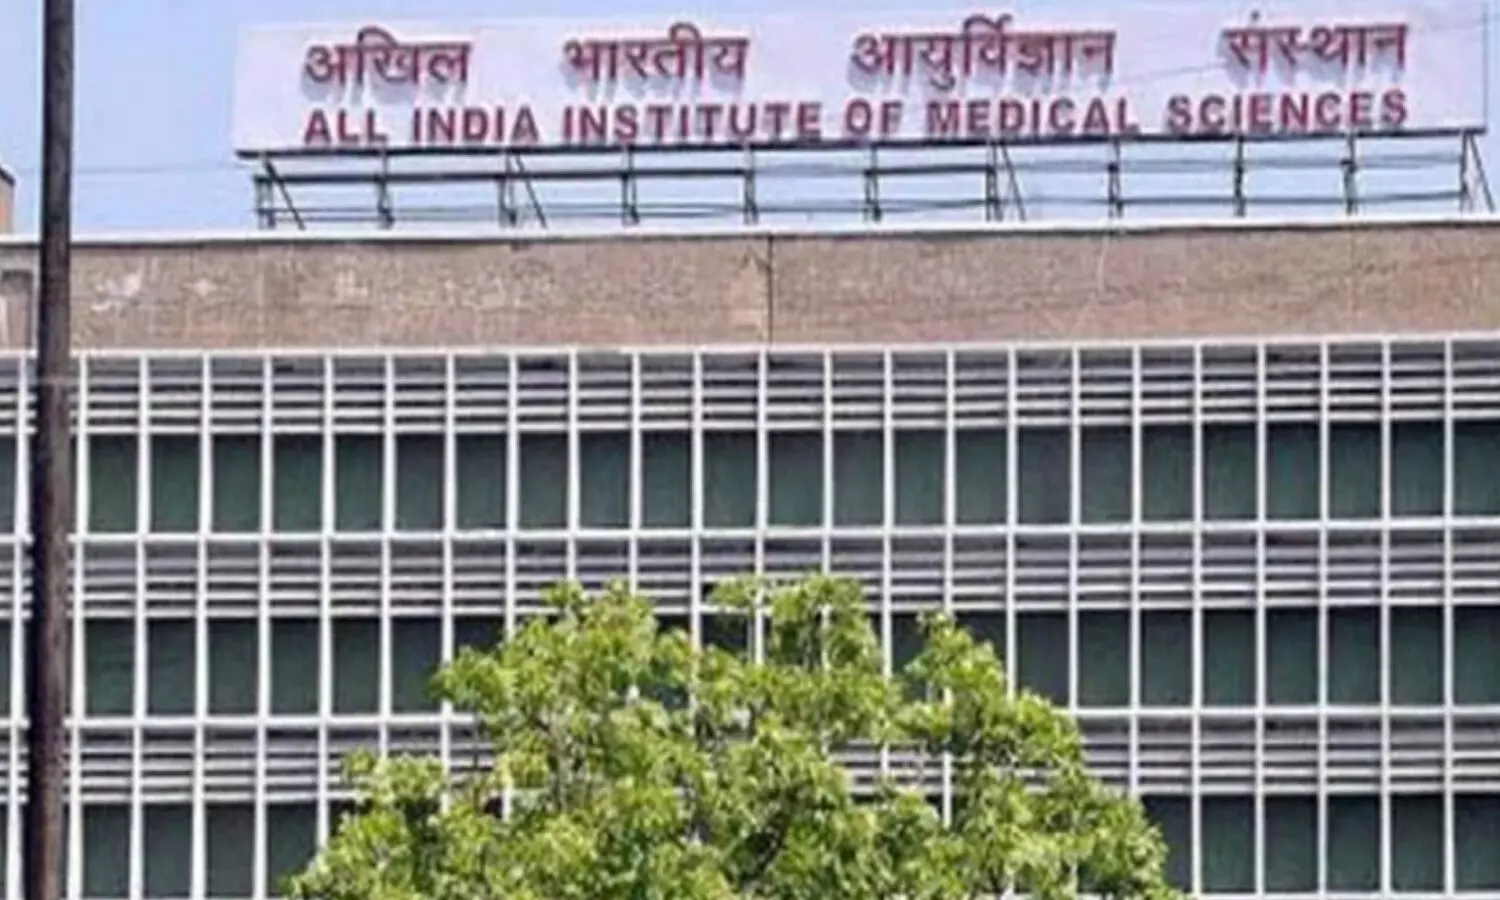 23 AIIMS to get names after Freedom Fighters, Historical Monuments